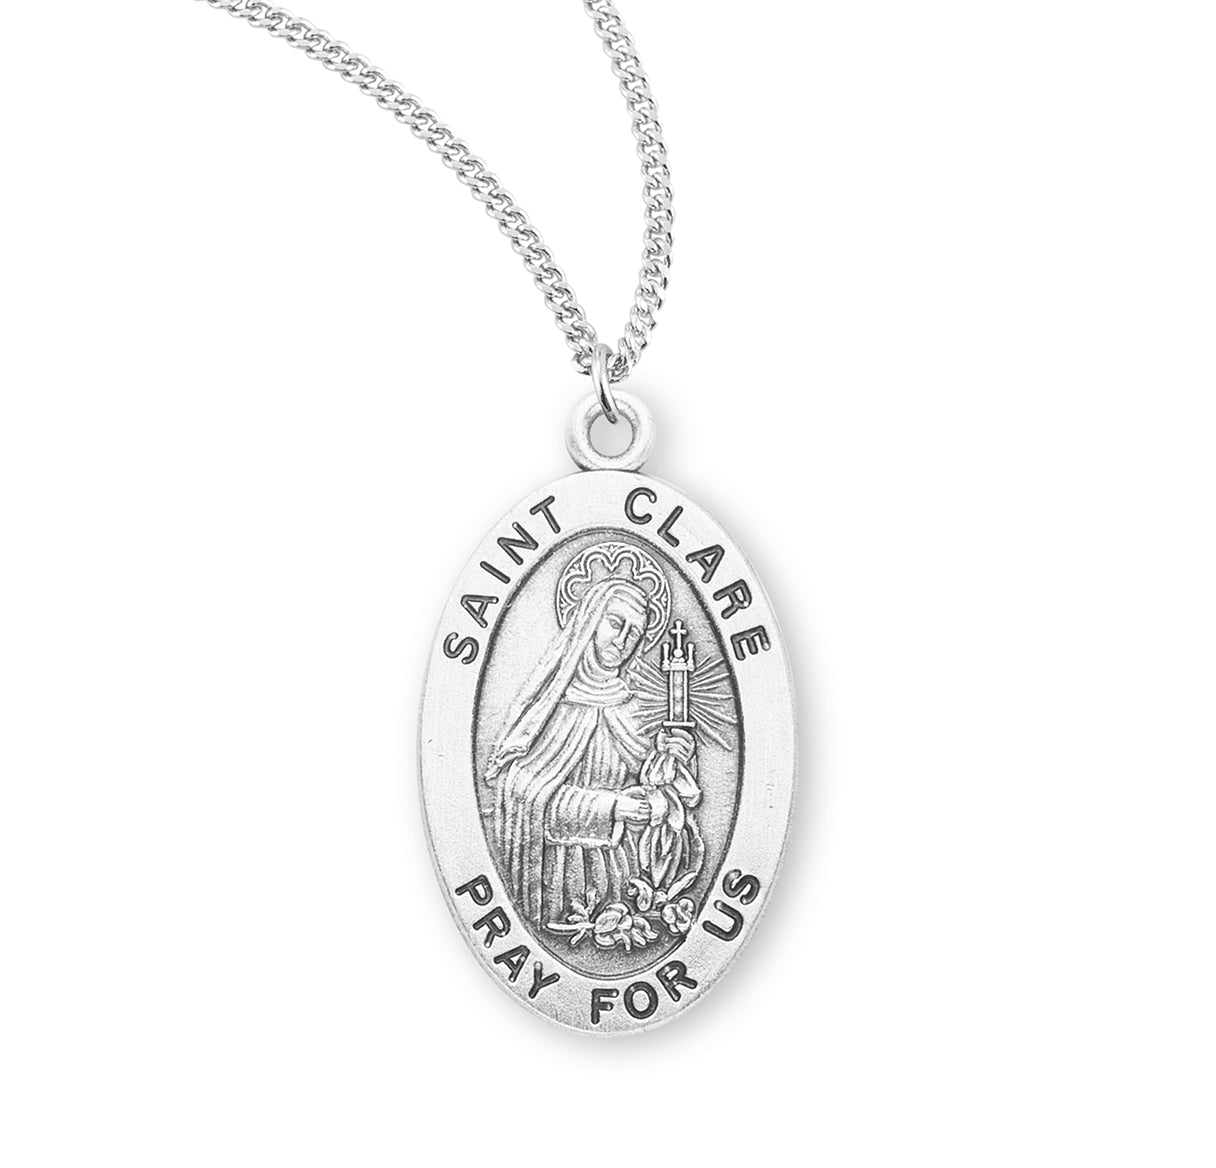 Patron Saint Clare Oval Sterling Silver Medal